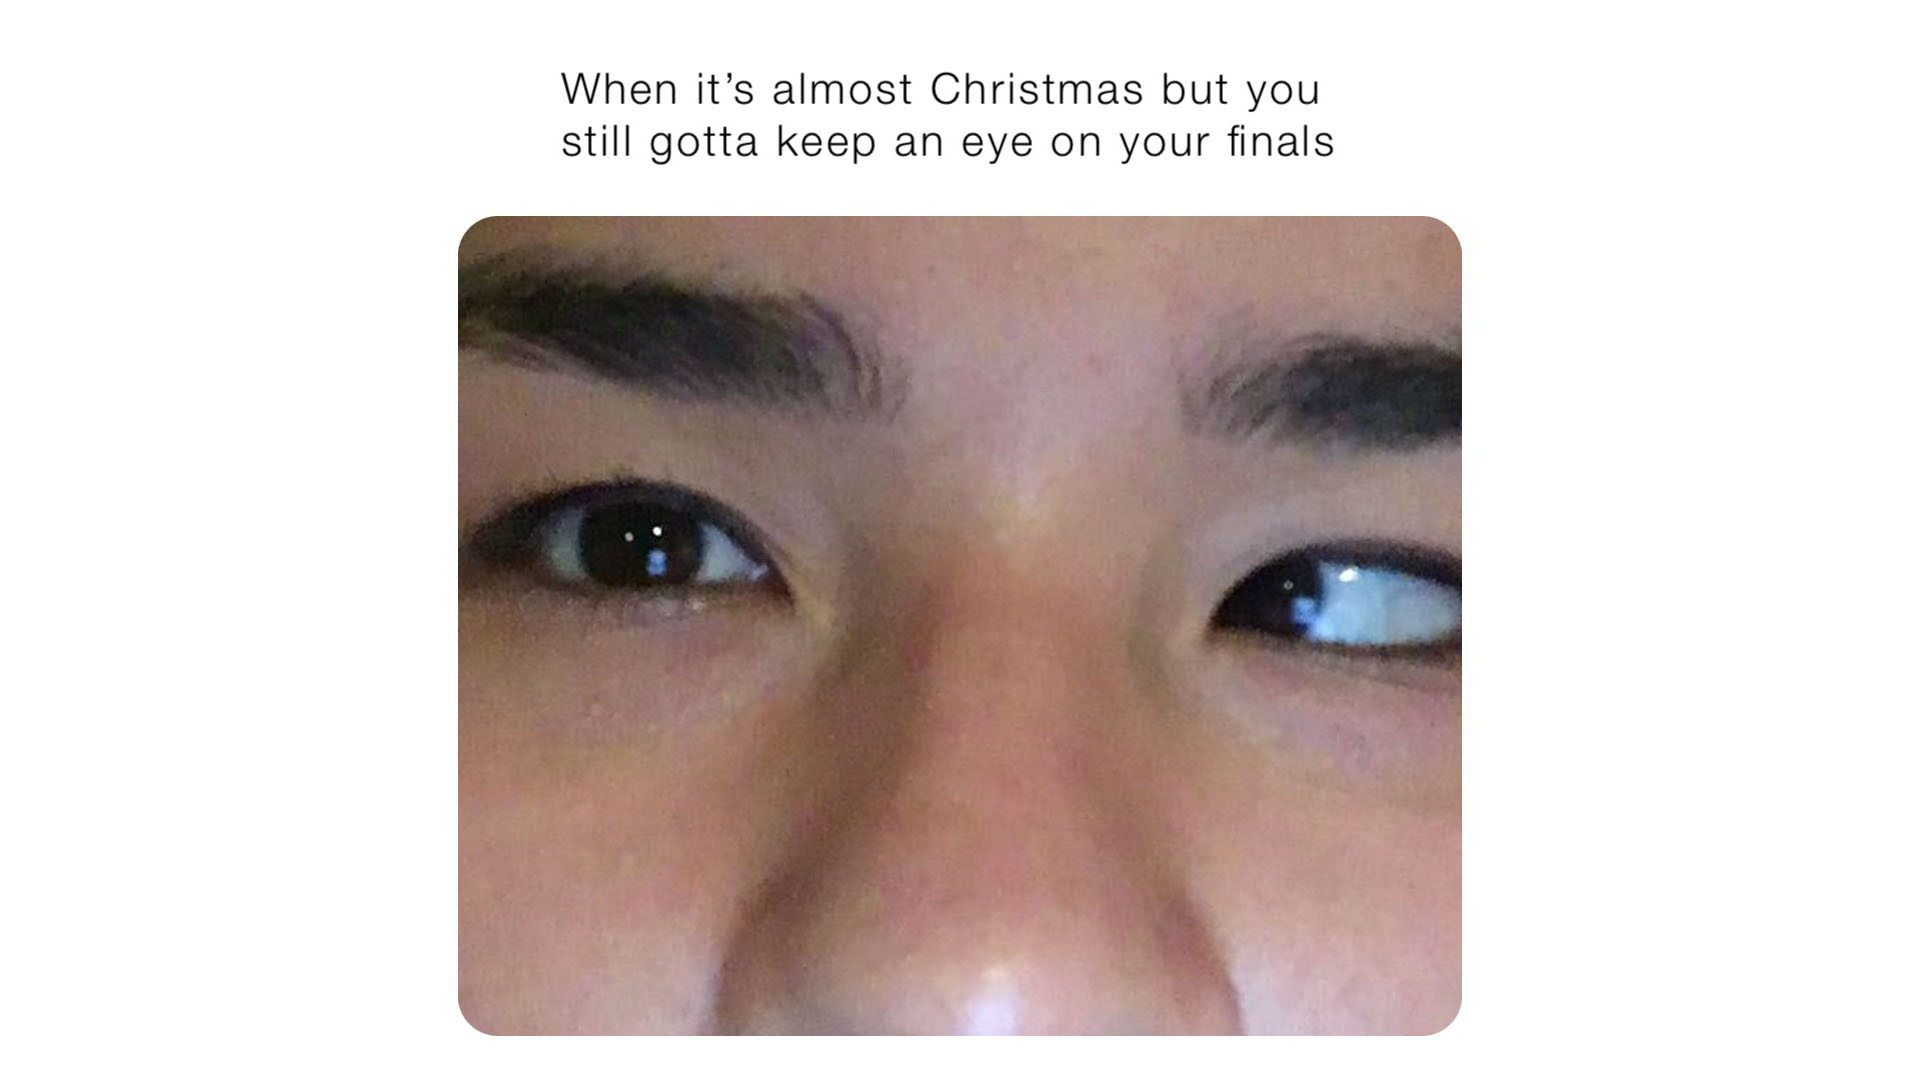 Title: When it's almost Christmas but you still gotta keep an eye on your exams. A close up on a person's face with one eye slightly looking towards another direction.